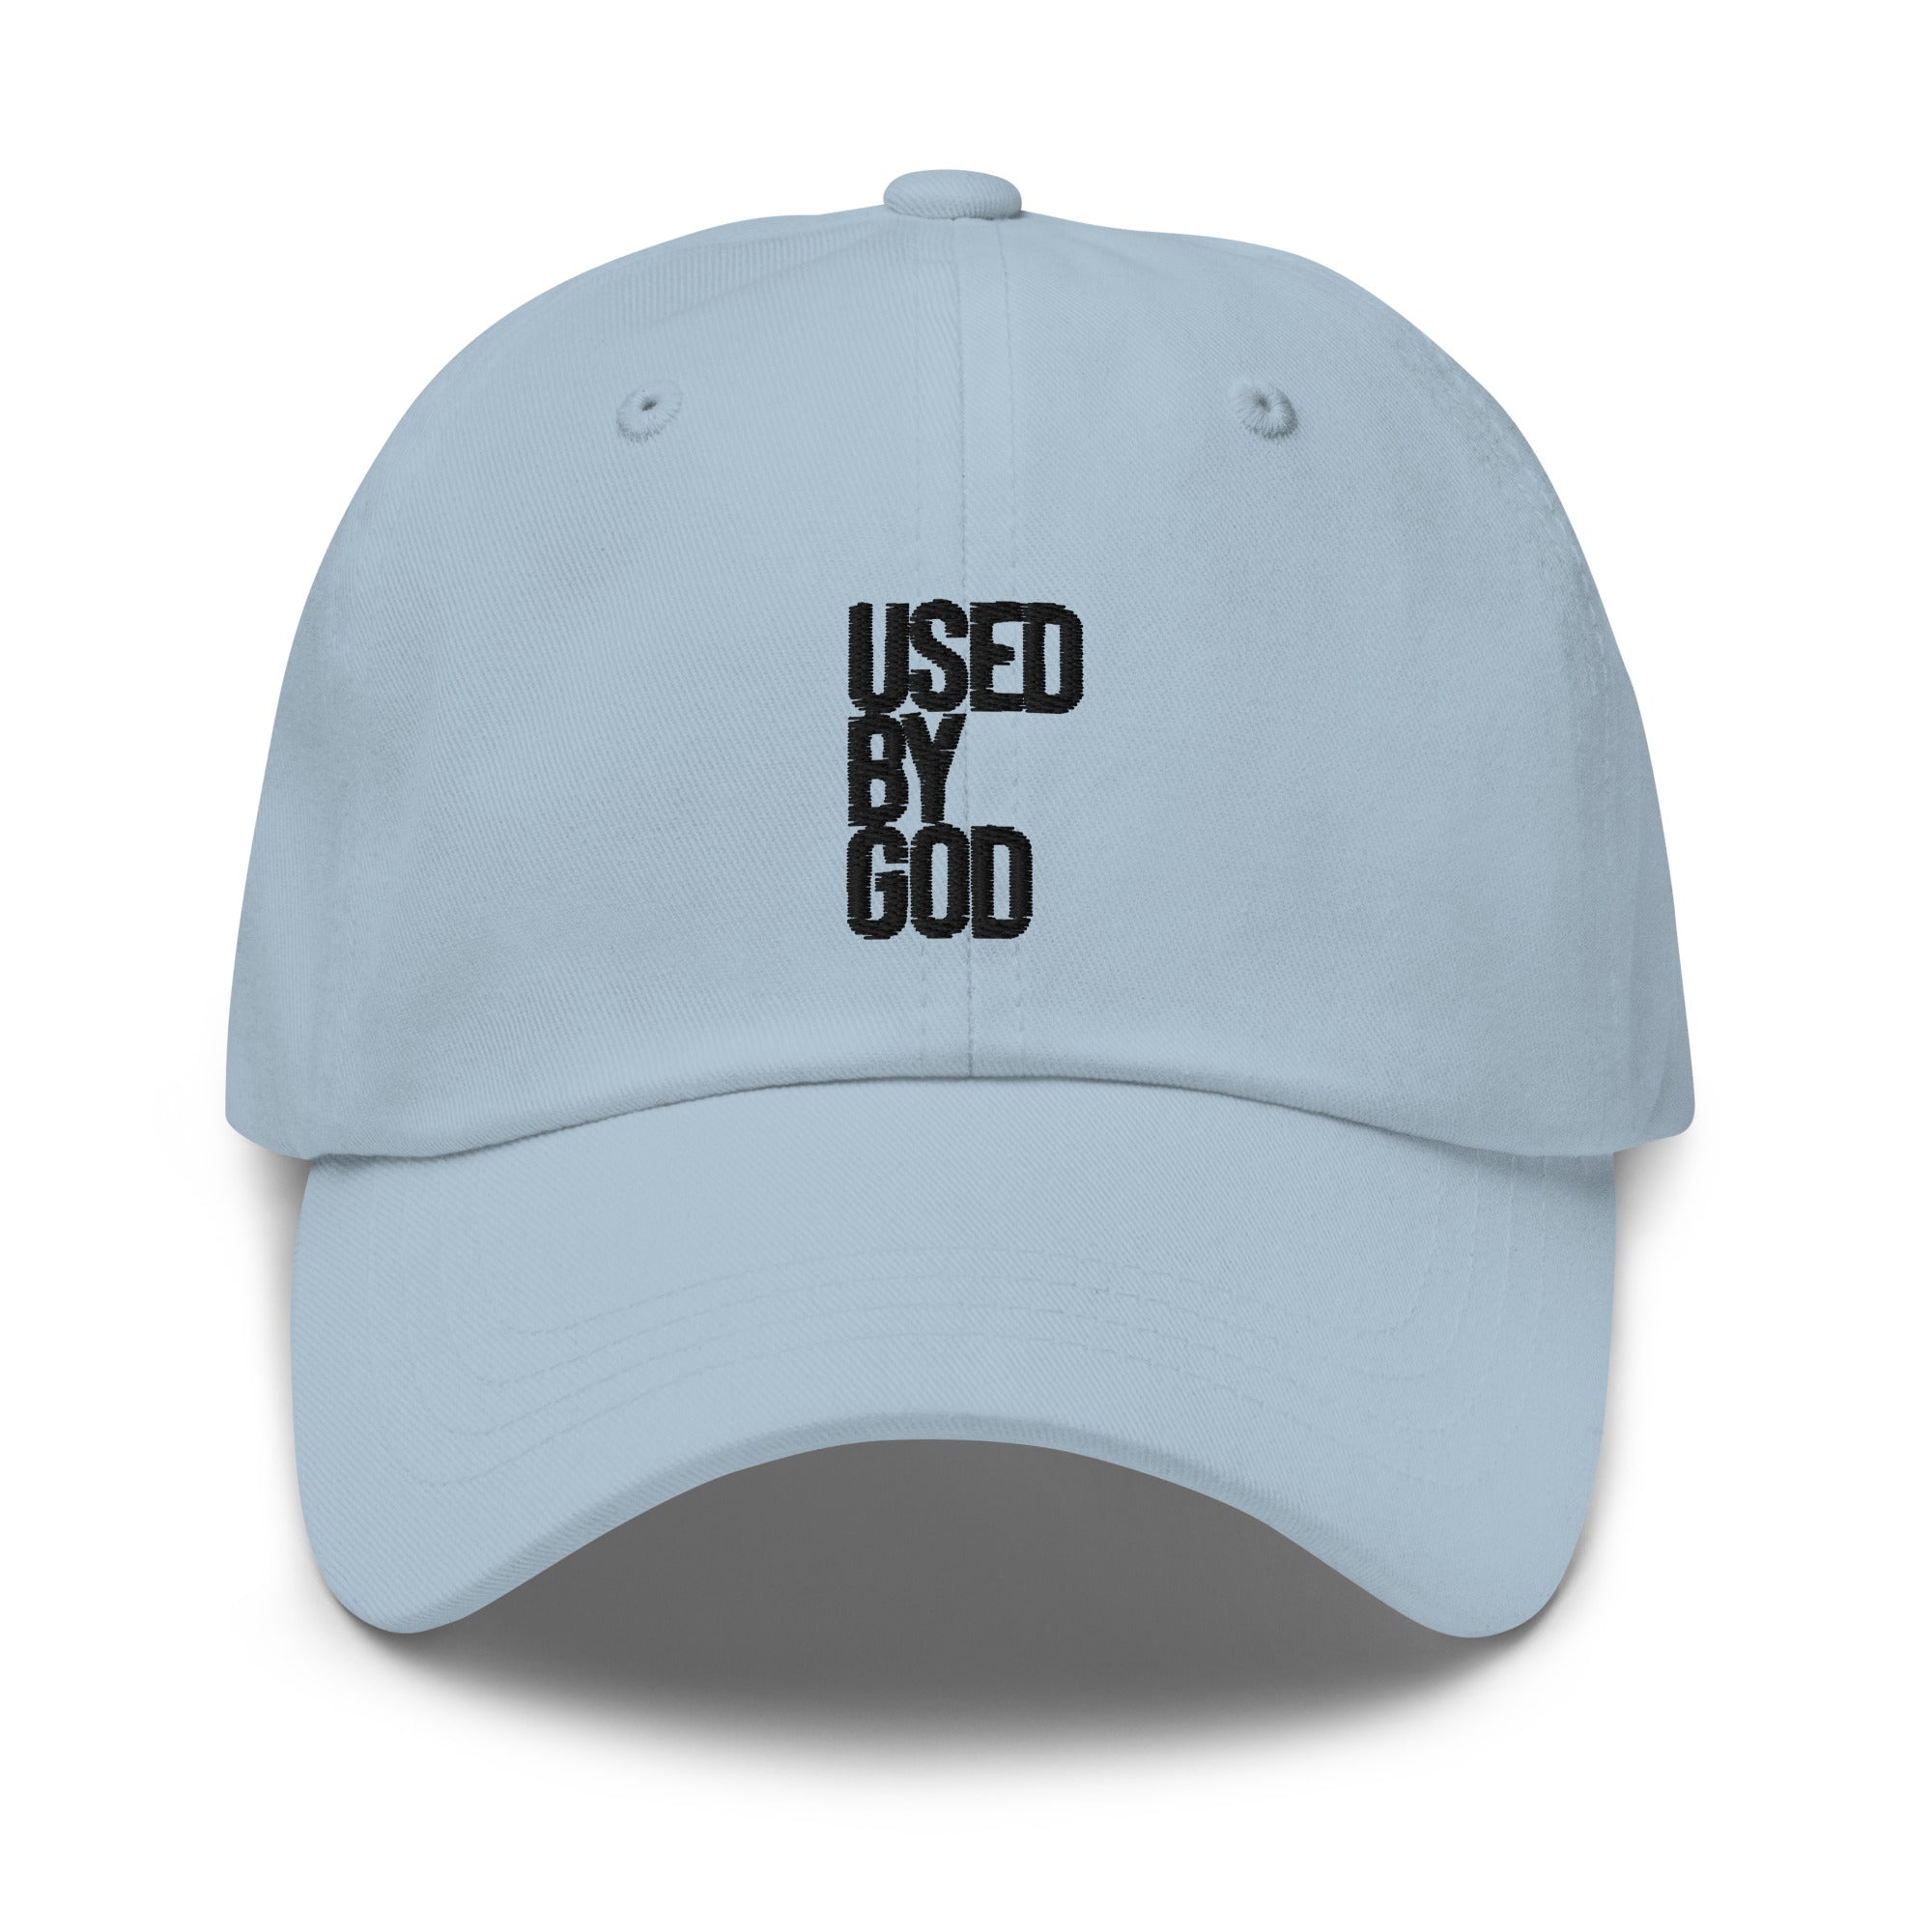 UBG Logo Sky Blue Dad Hat, Used By God, Used By God Clothing, Christian Apparel, Christian Hats, Christian T-Shirts, Christian Clothing, God Shirts, Christian Sweatshirts, God Clothing, Jesus Hoodie, Jesus Clothes, God Is Dope, Art Of Homage, Red Letter Clothing, Elevated Faith, Active Faith Sports, Beacon Threads, God The Father Apparel